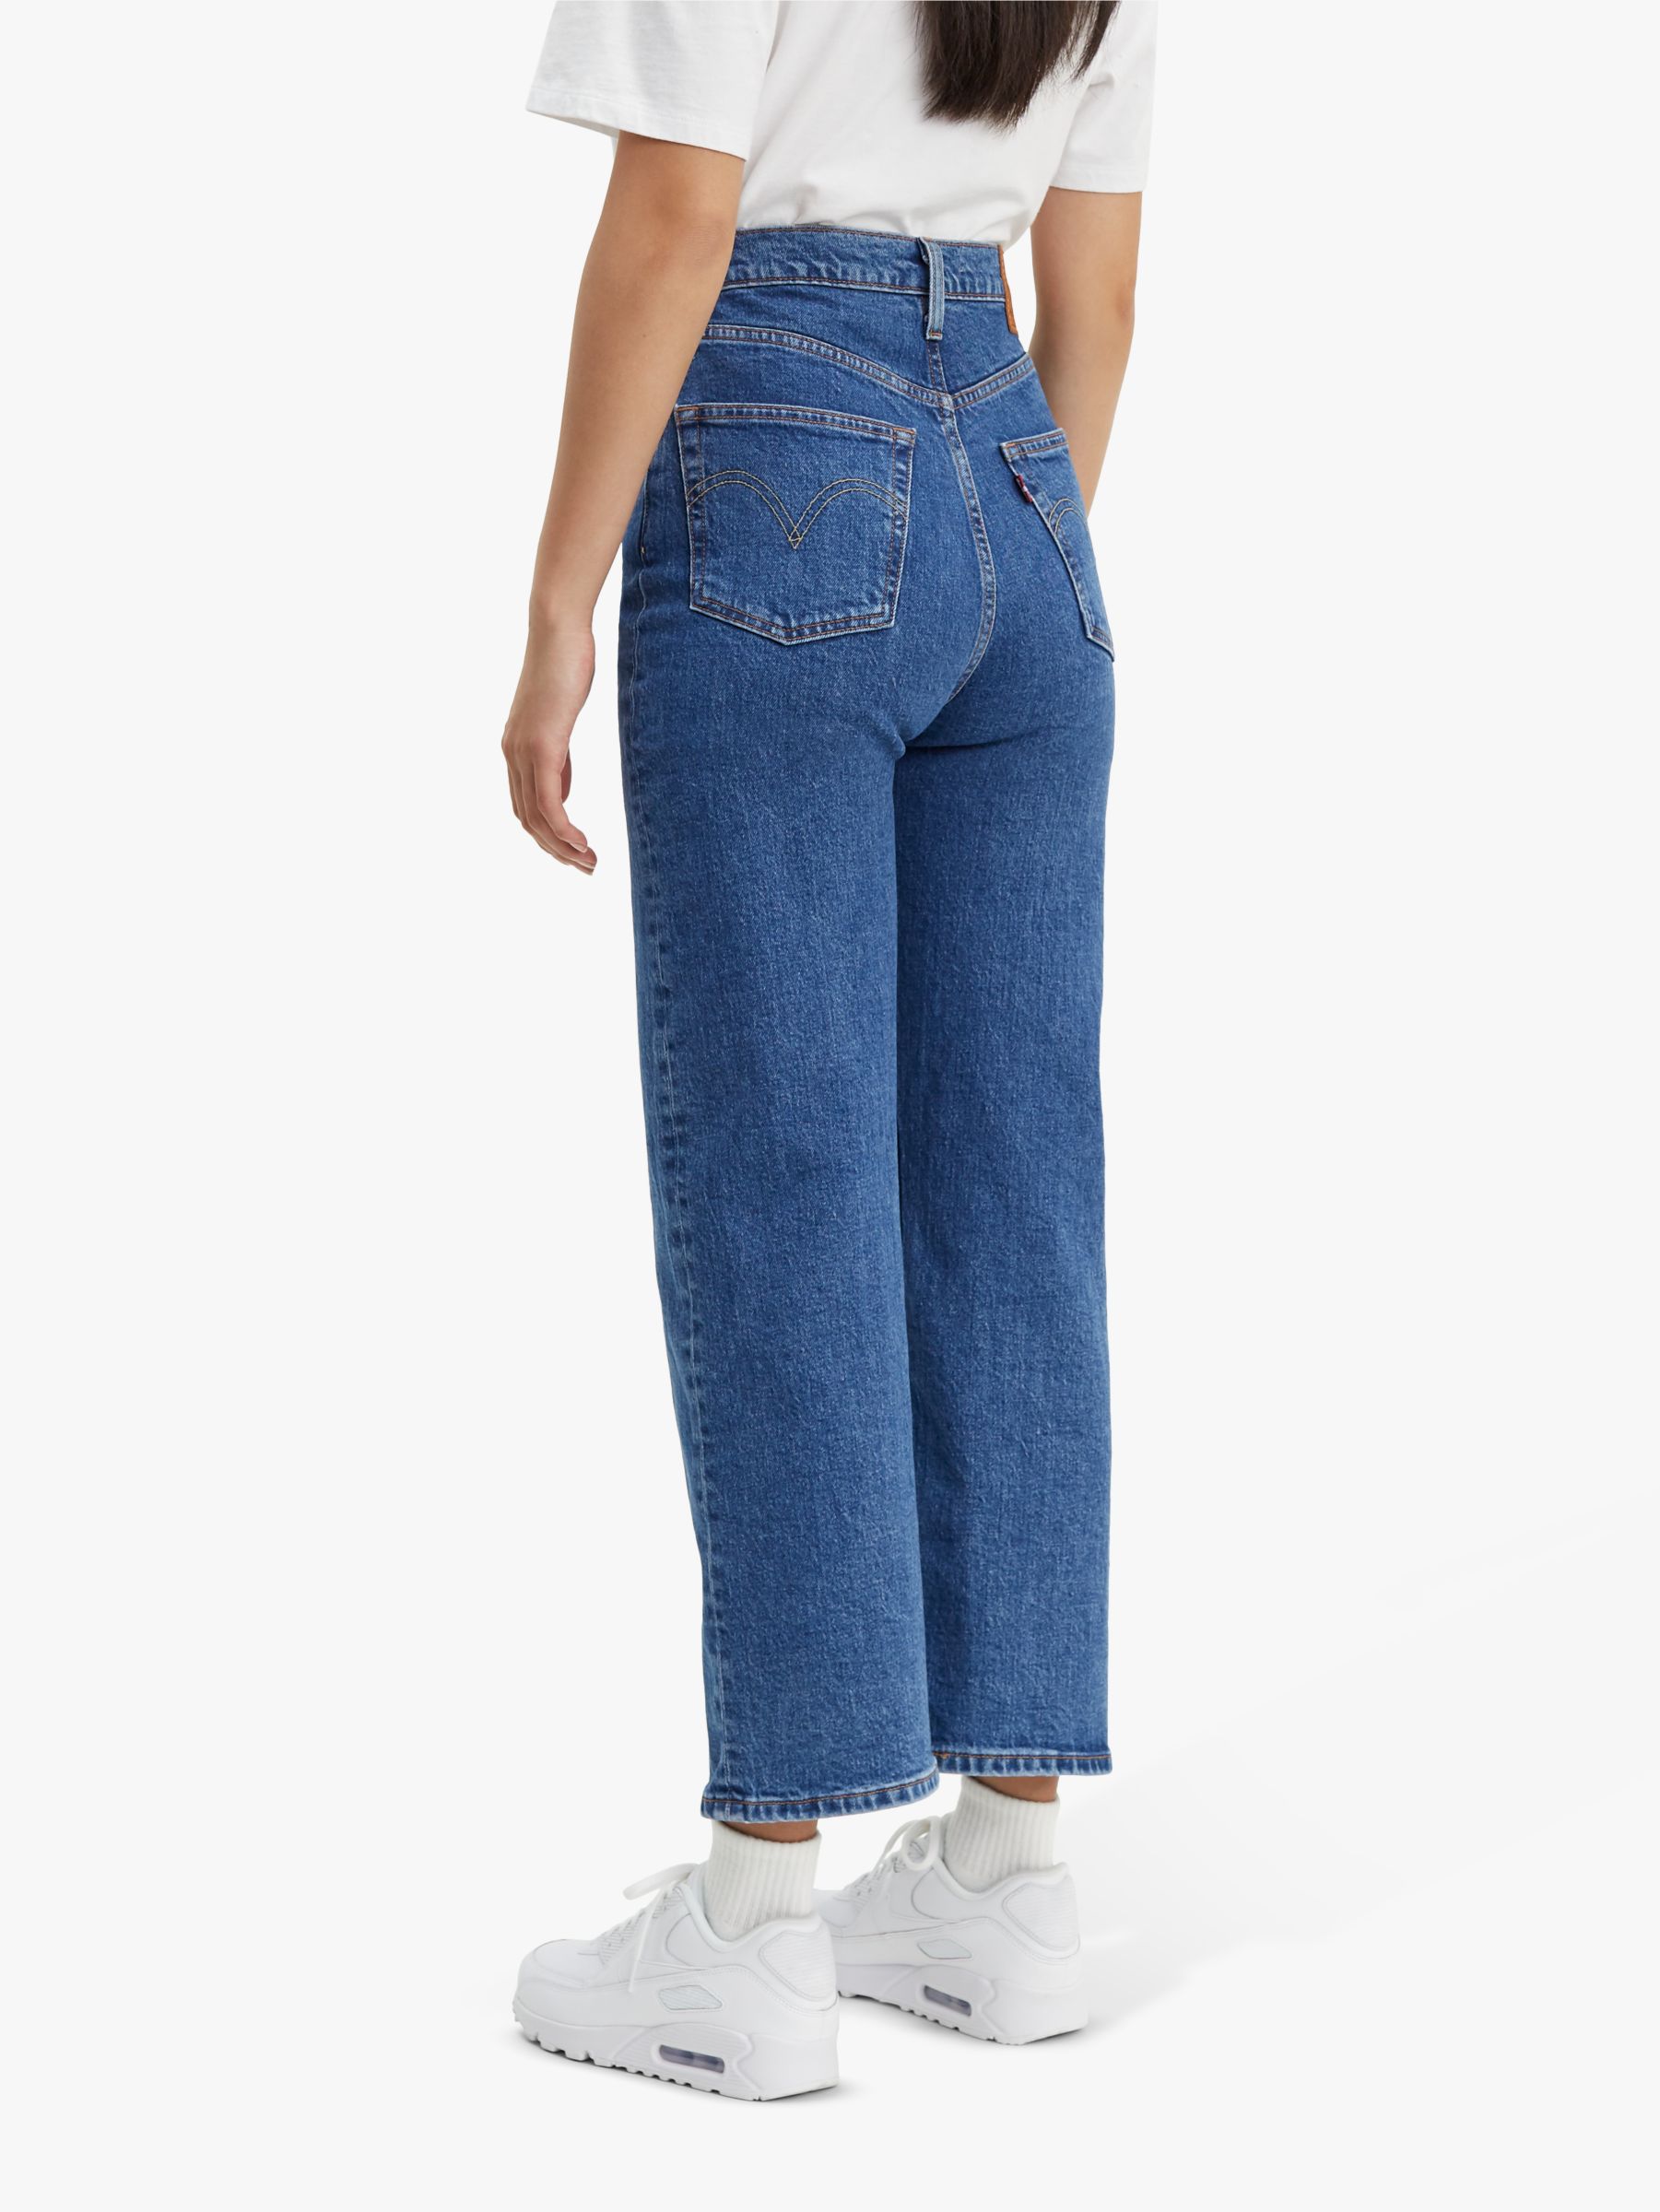 Ribcage Straight Ankle Jeans, Georgie 